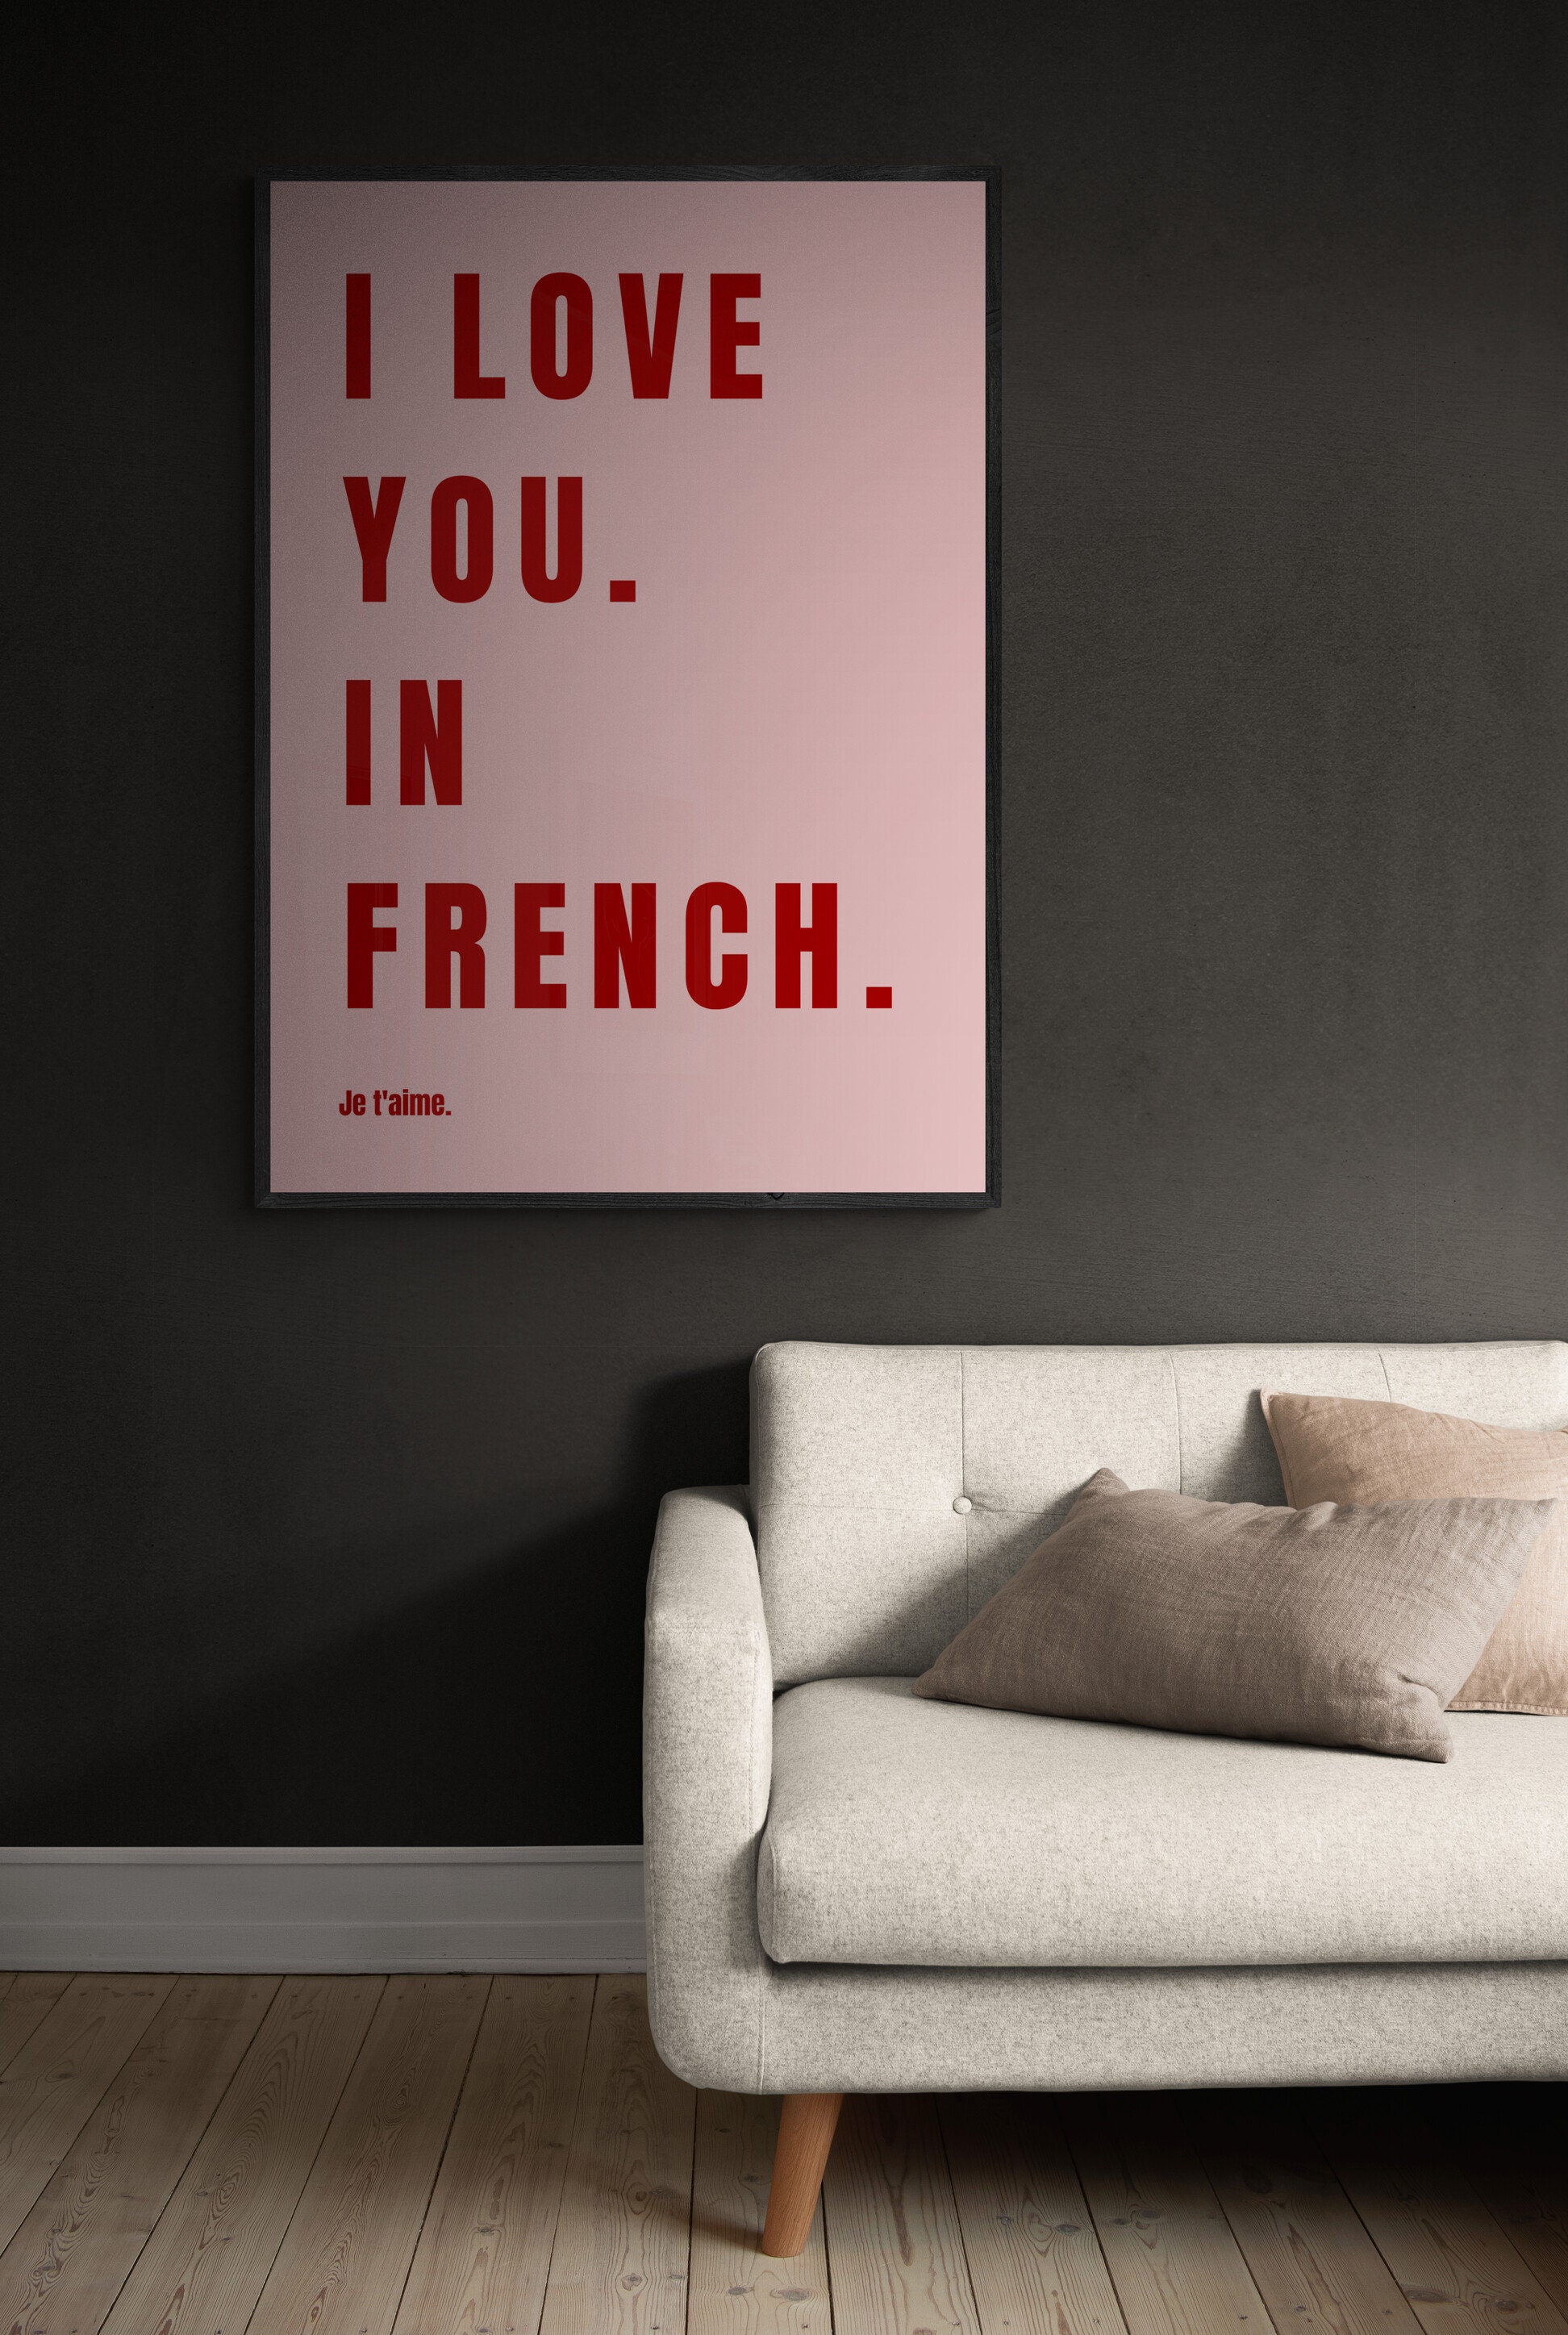 I love you in French Typography Digital Graphic Print | Etsy